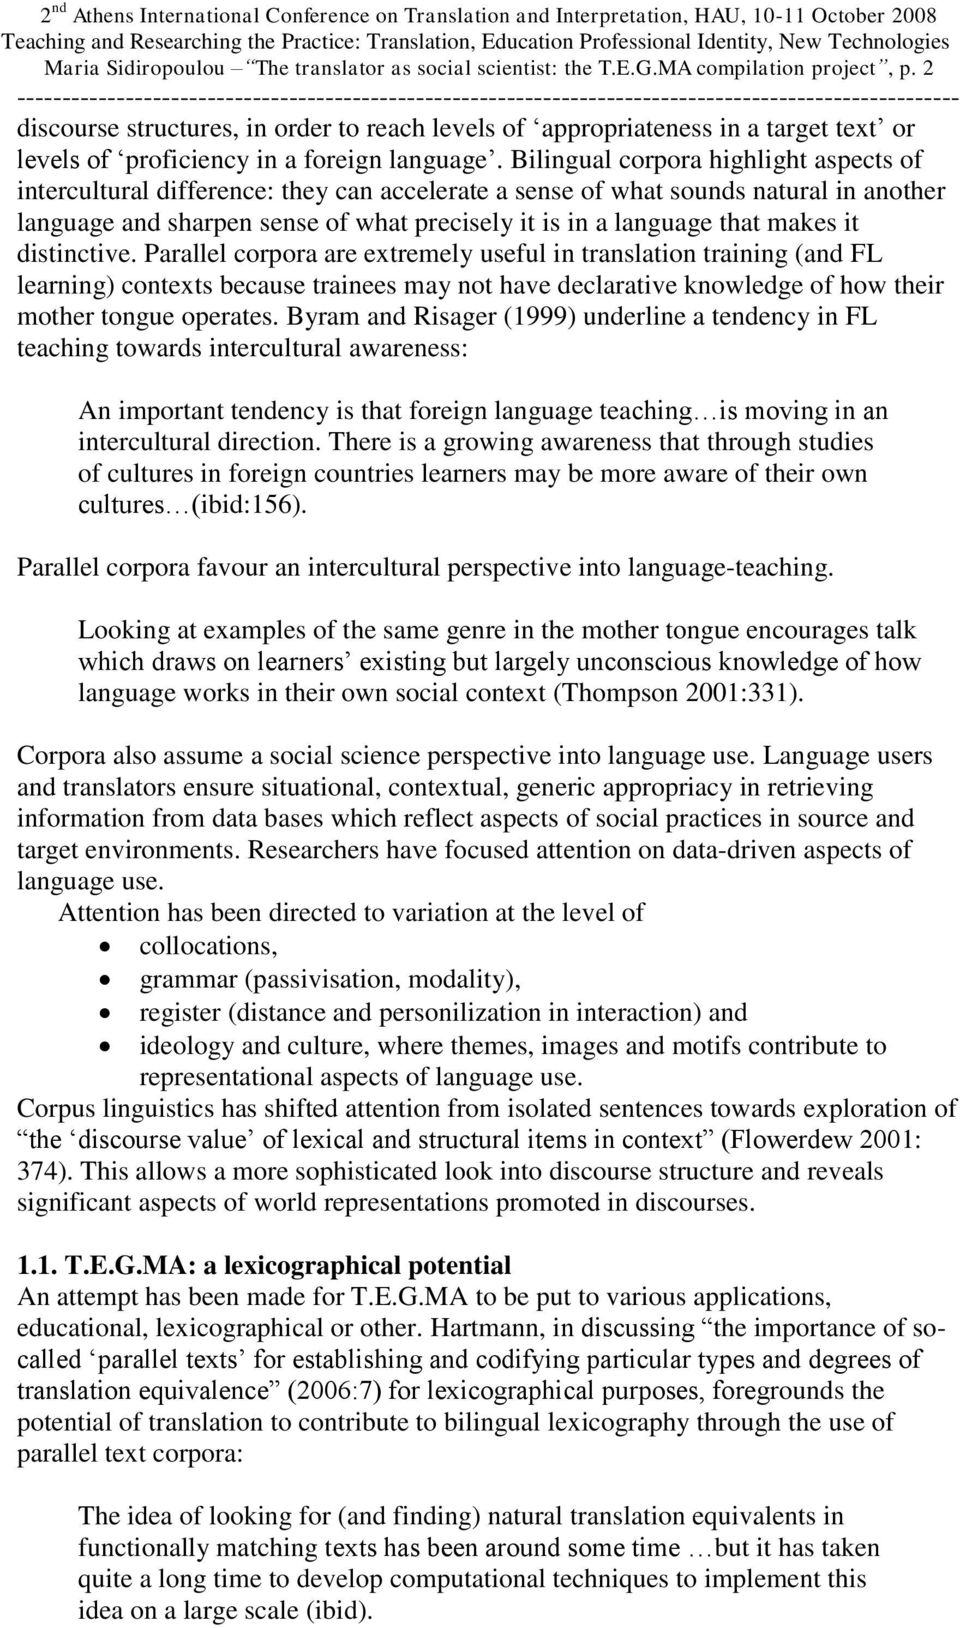 Bilingual corpora highlight aspects of intercultural difference: they can accelerate a sense of what sounds natural in another language and sharpen sense of what precisely it is in a language that